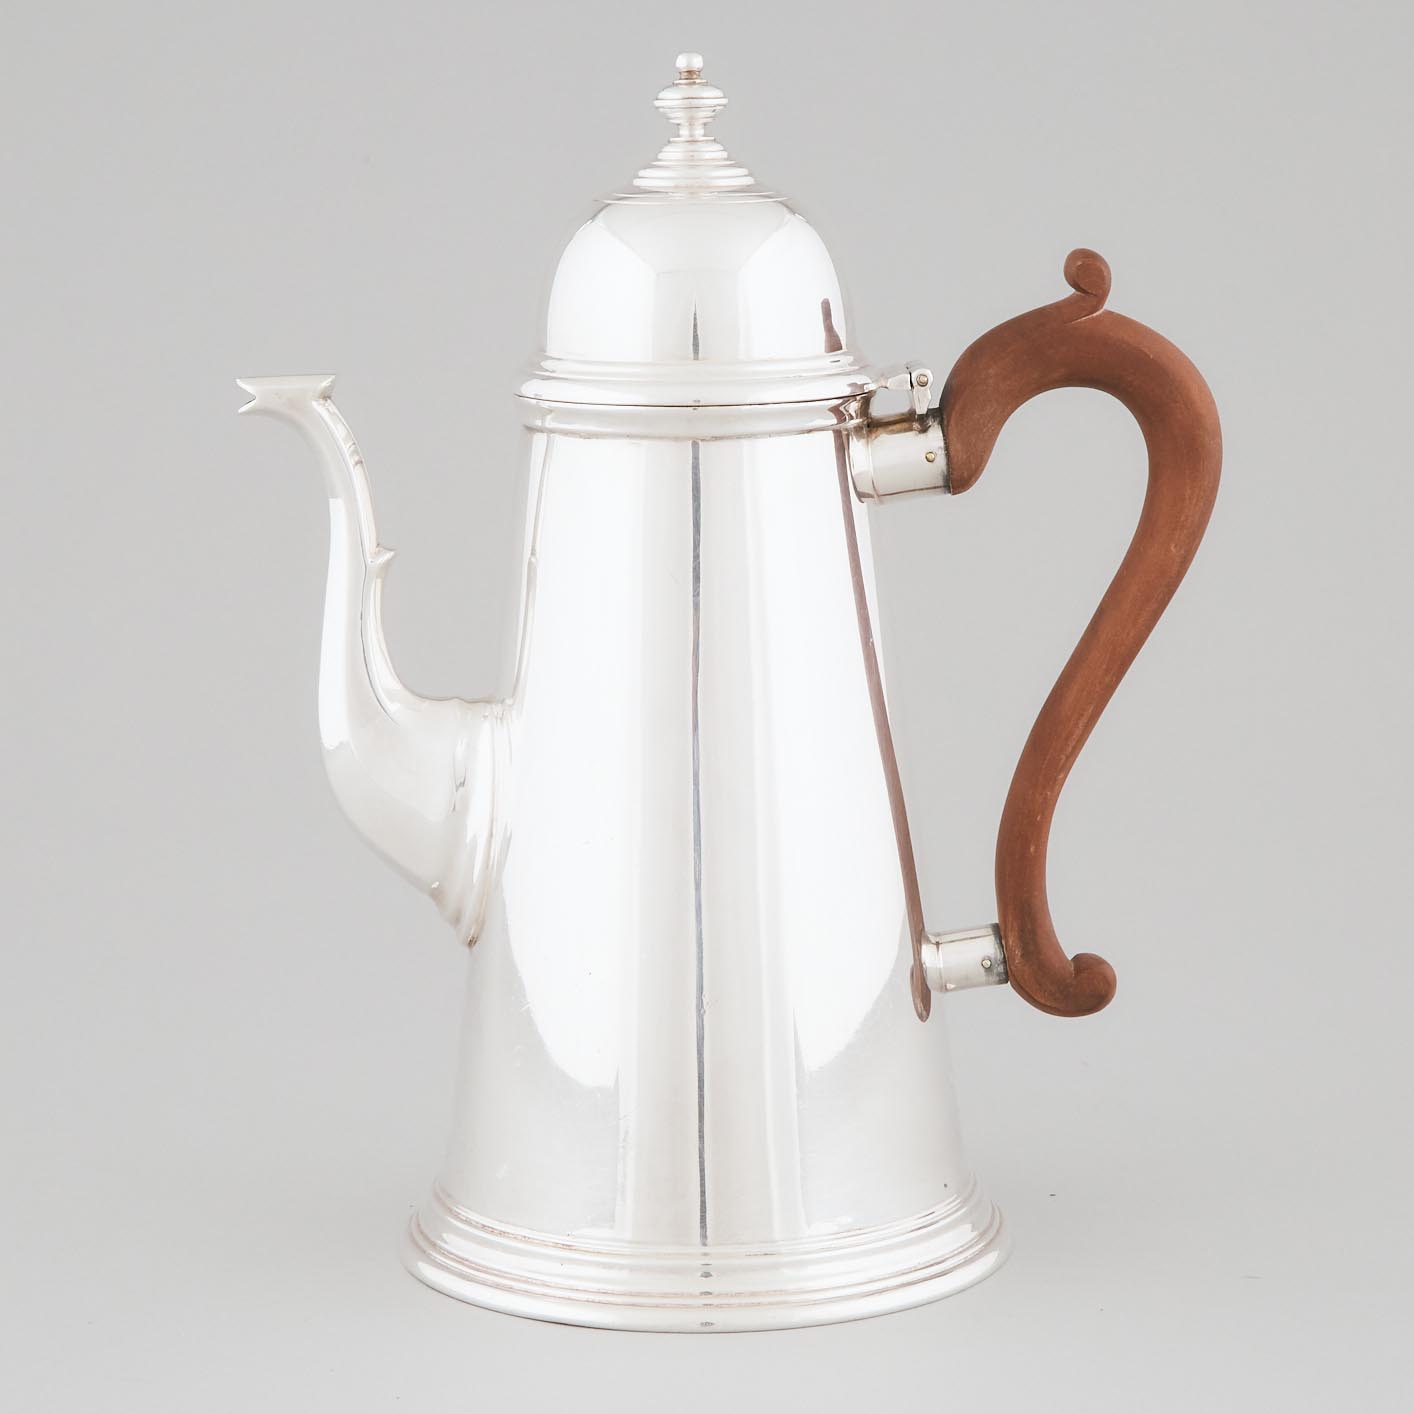 English Silver Coffee Pot, William Walter Antiques, Sheffield, 1970